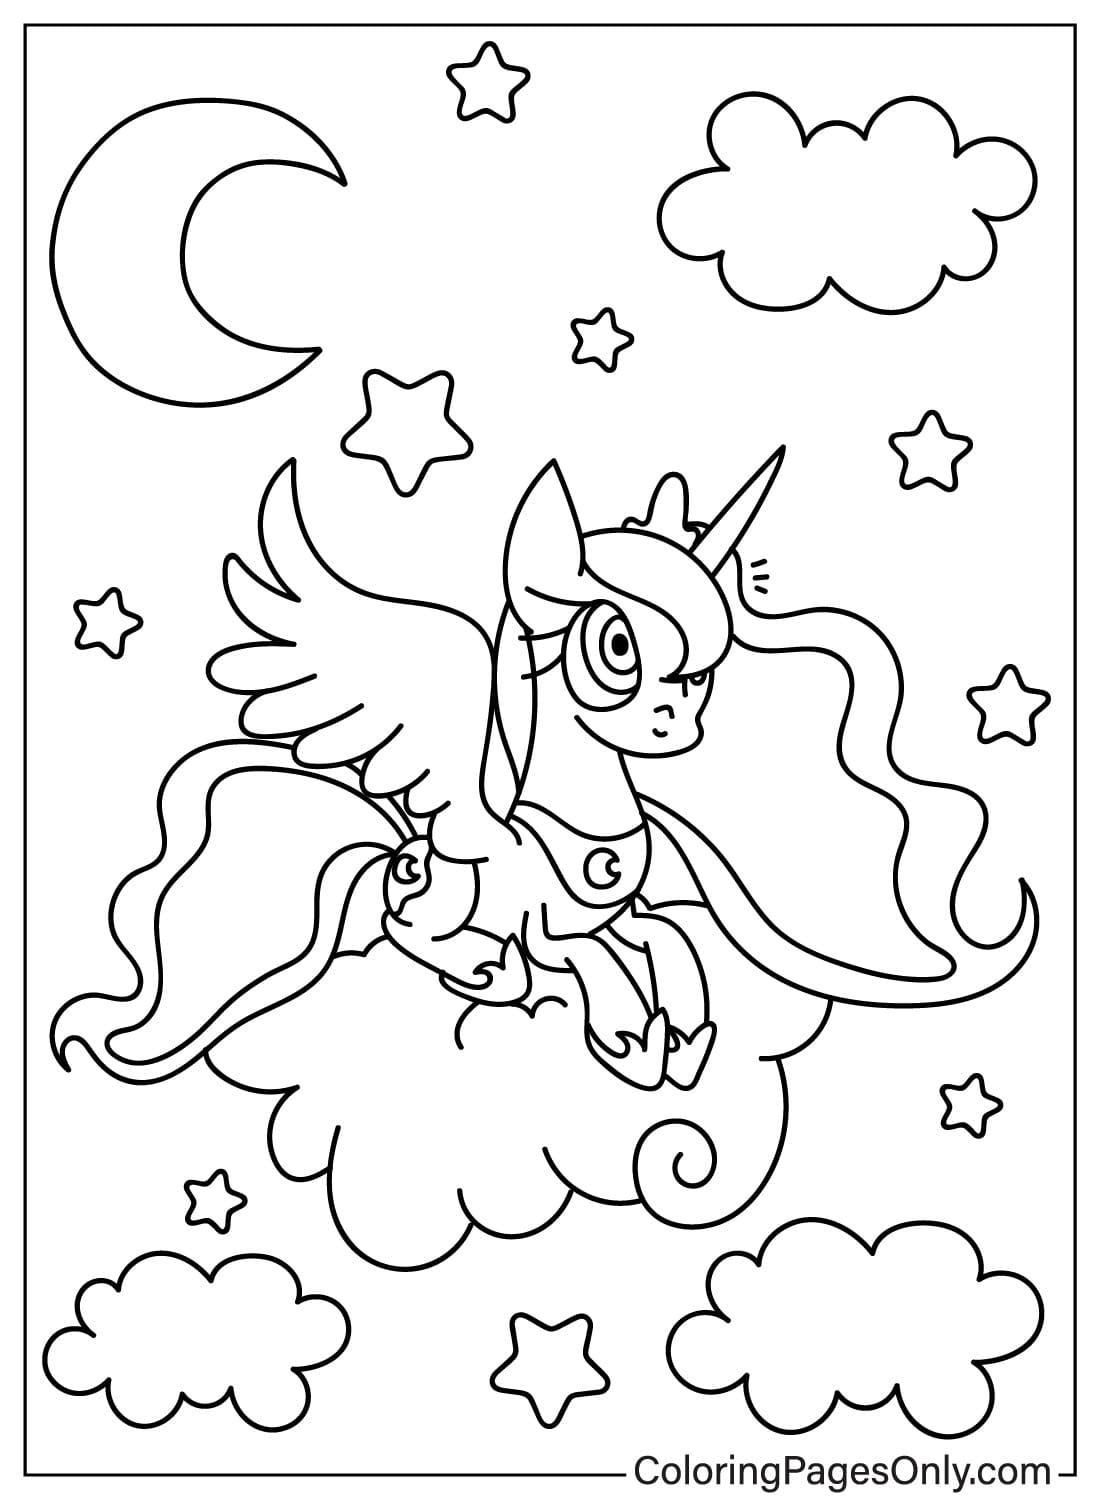 Princess Luna Flying in the Sky Coloring Sheet from Princess Luna